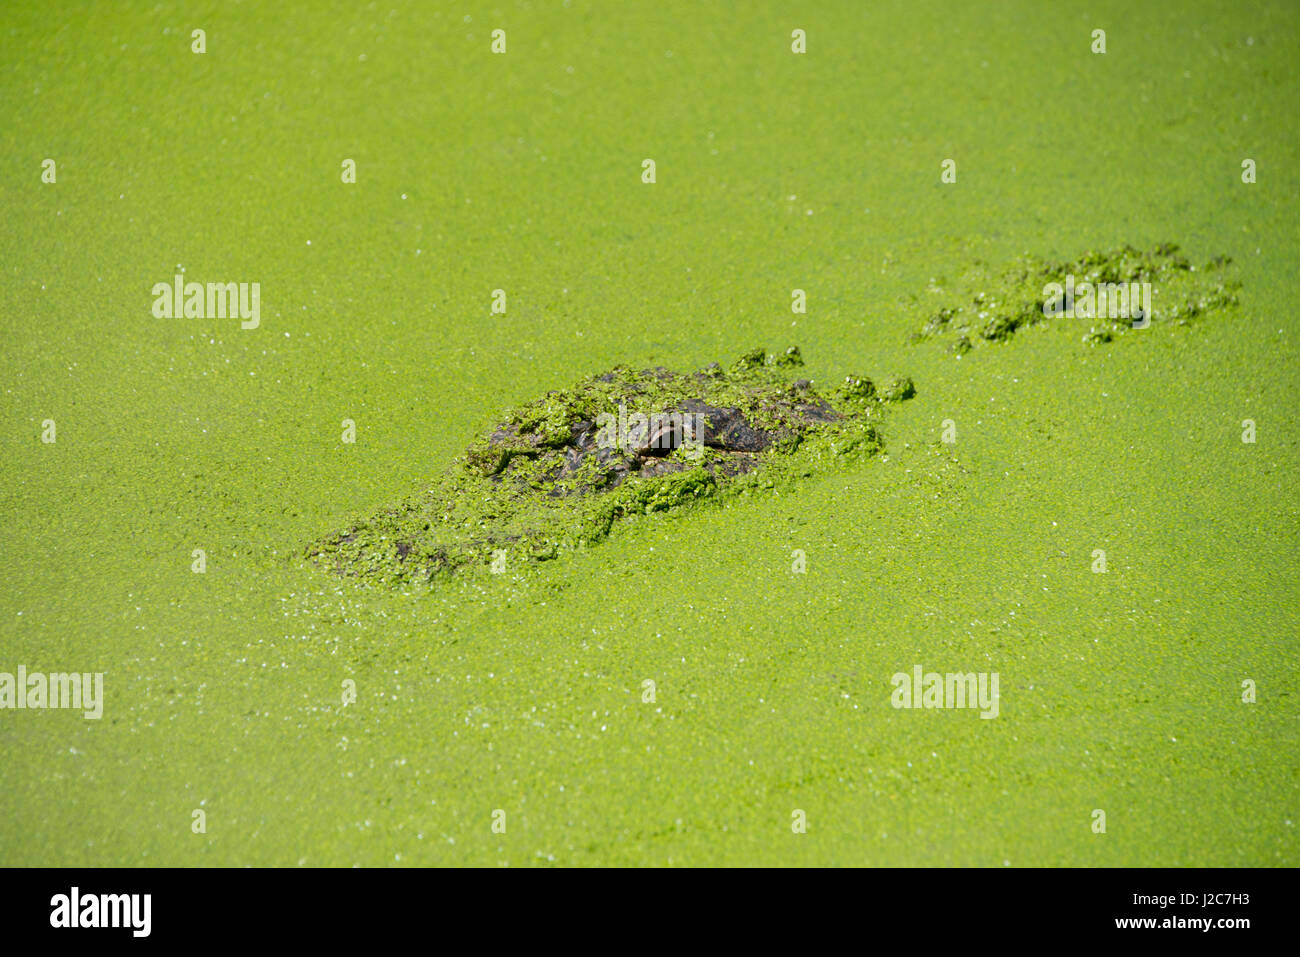 Western Australia, Broome. Malcolm Douglas Crocodile Park. American alligator (Alligator mississippiensis) in green duckweed covered pond (introduced species, Lemna minuta). (Large format sizes available) Stock Photo